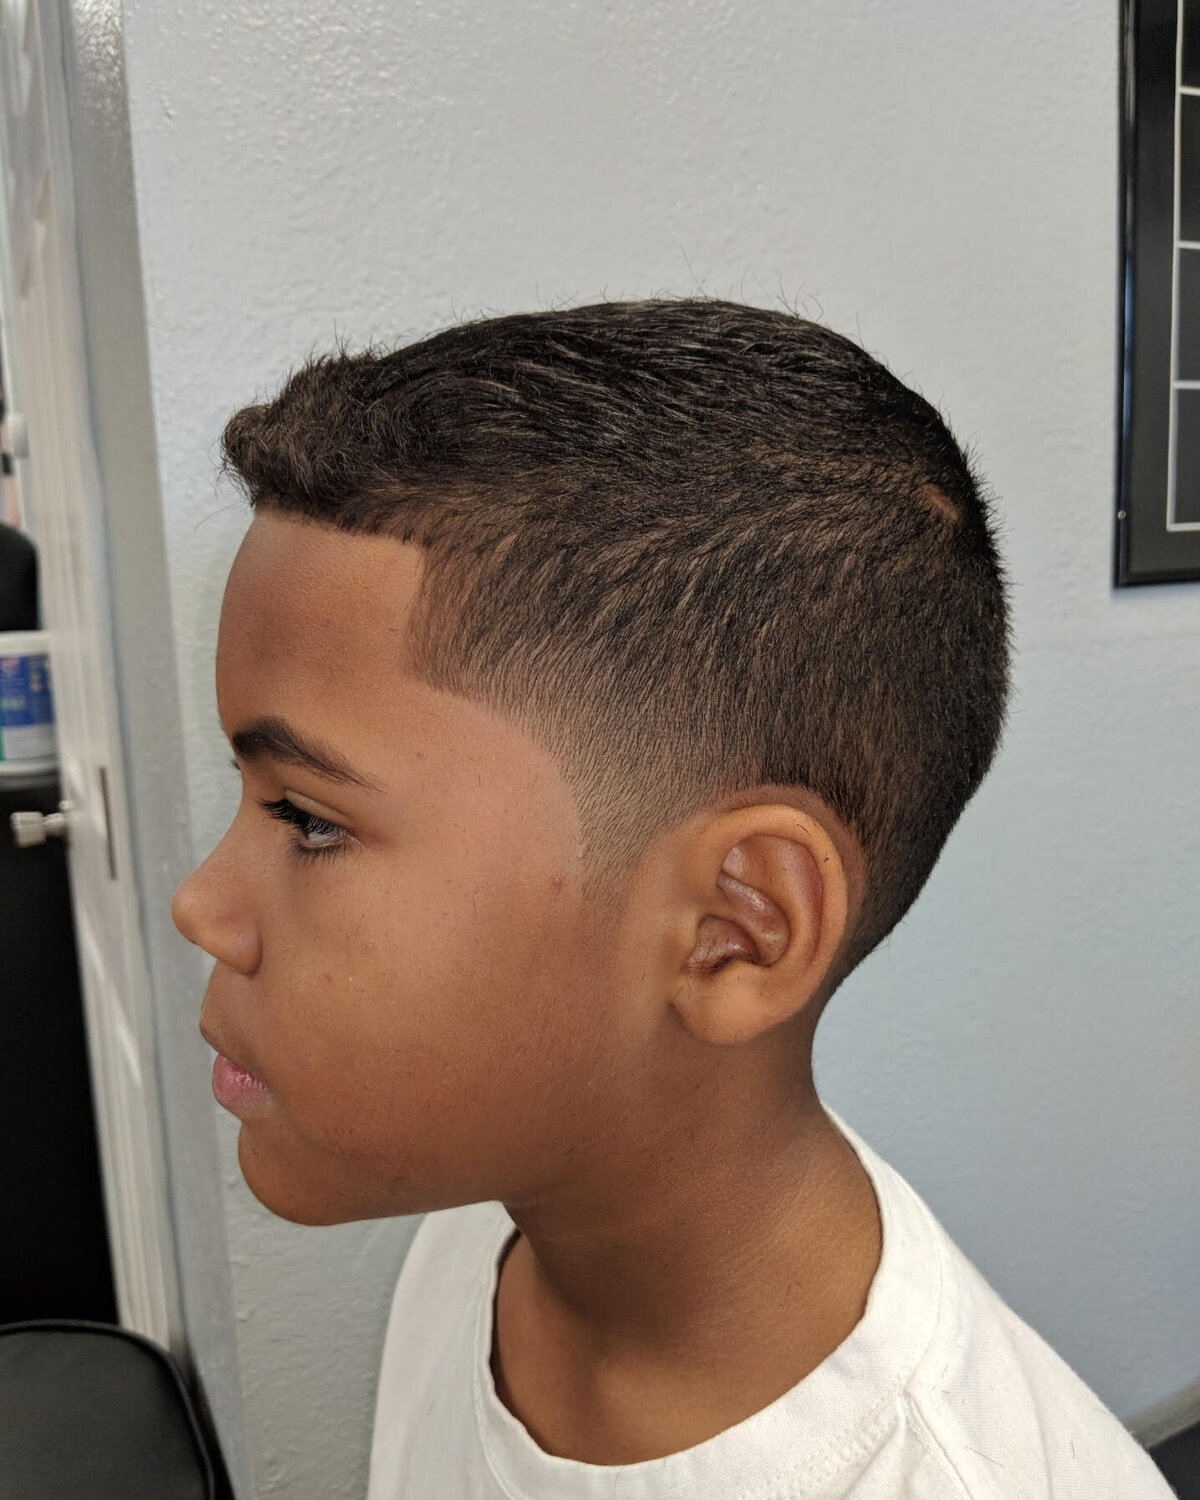 Kids Fade - Haircut - Who's Your Barber in Venice Florida